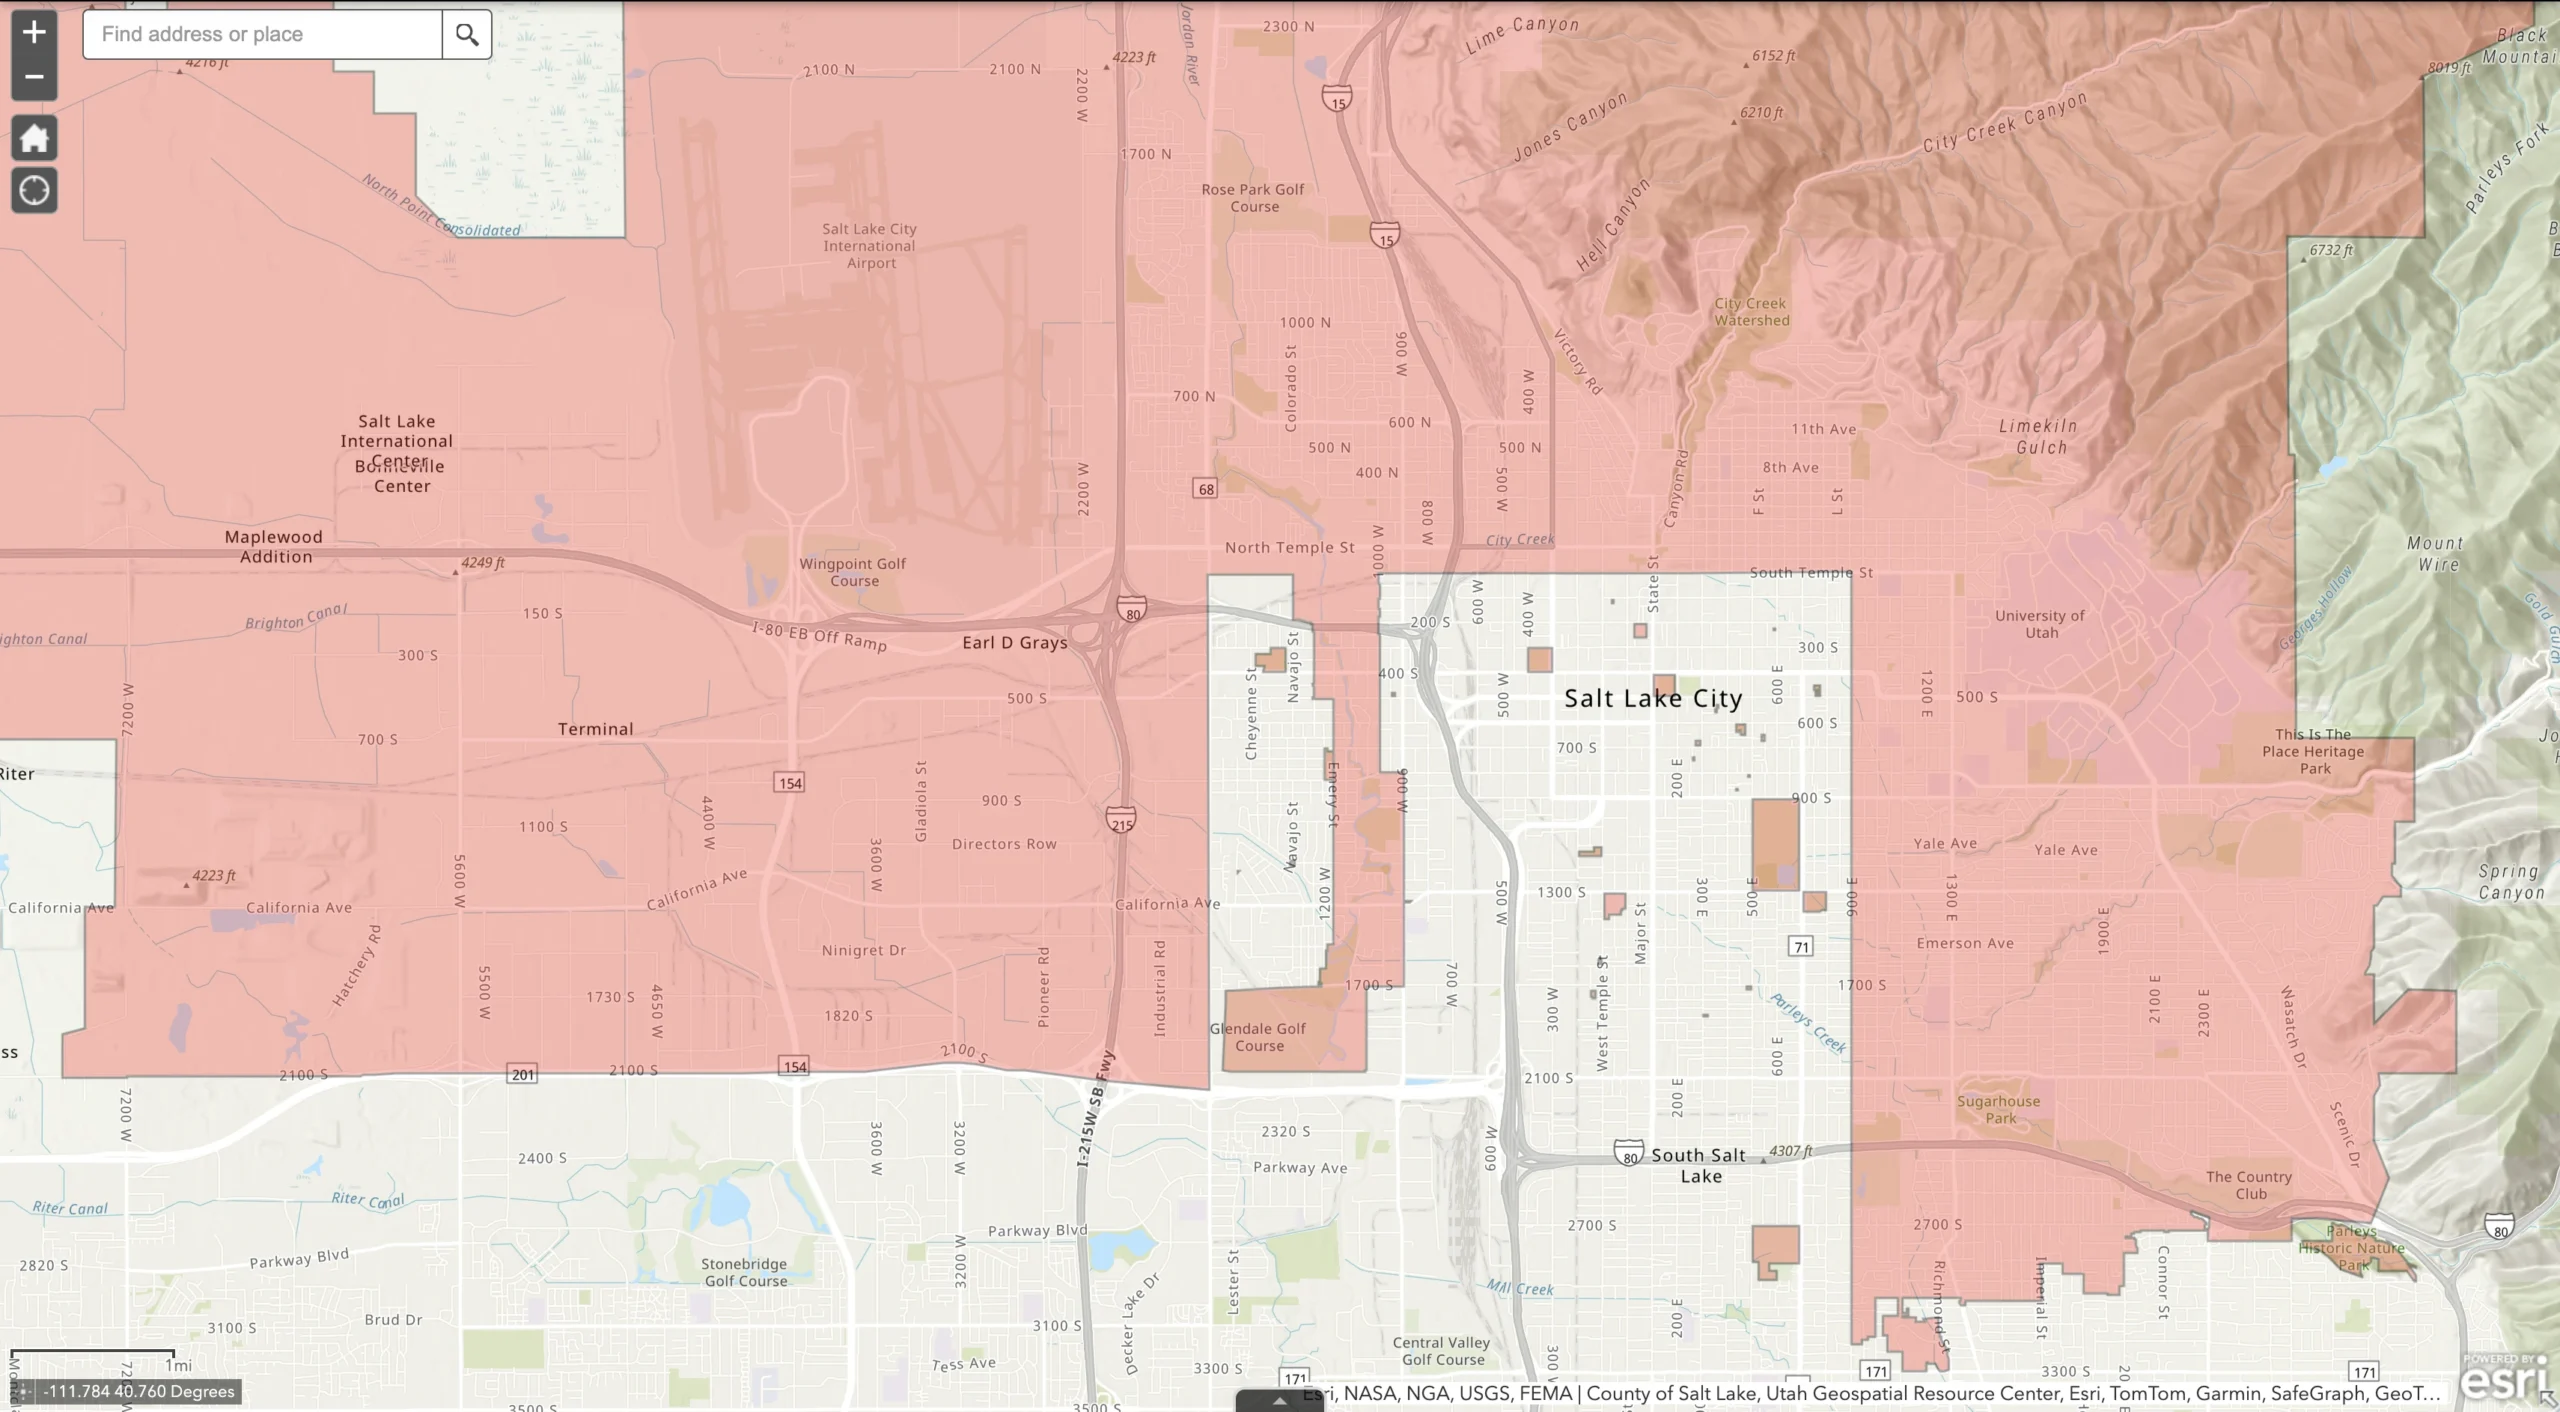 A map showing salt lake city firework restricted areas